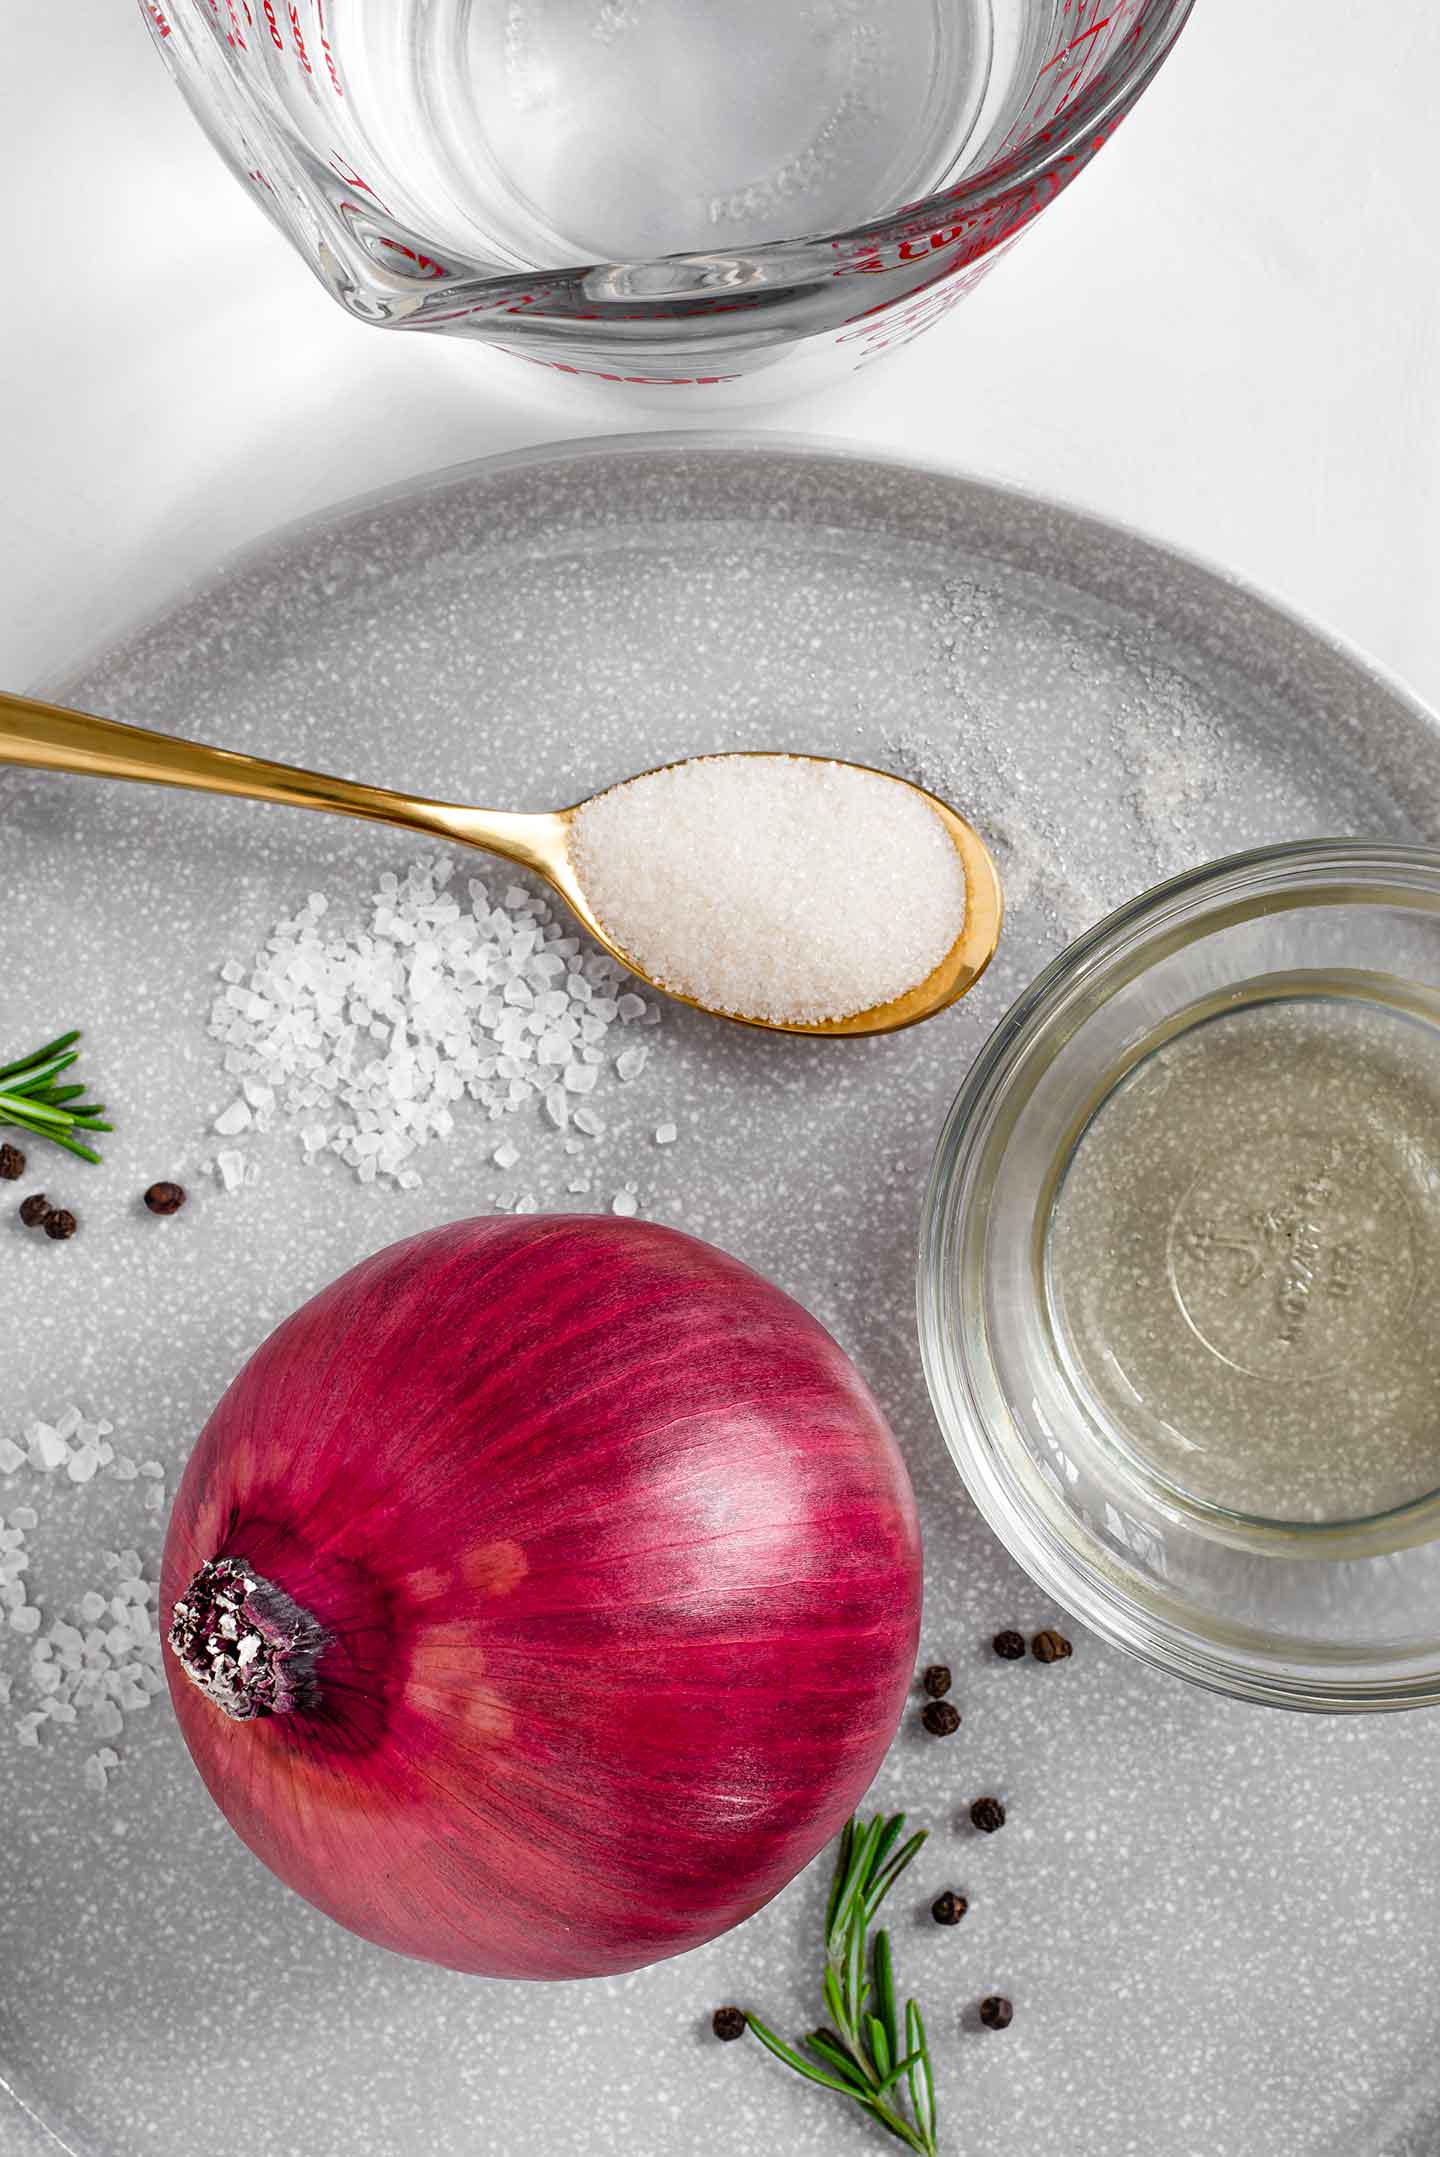 Top down view of a red onion on a large plate with a small bowl of vinegar, a spoon of sugar, a measuring cup of water, and sprigs of rosemary and peppercorns scattered around.